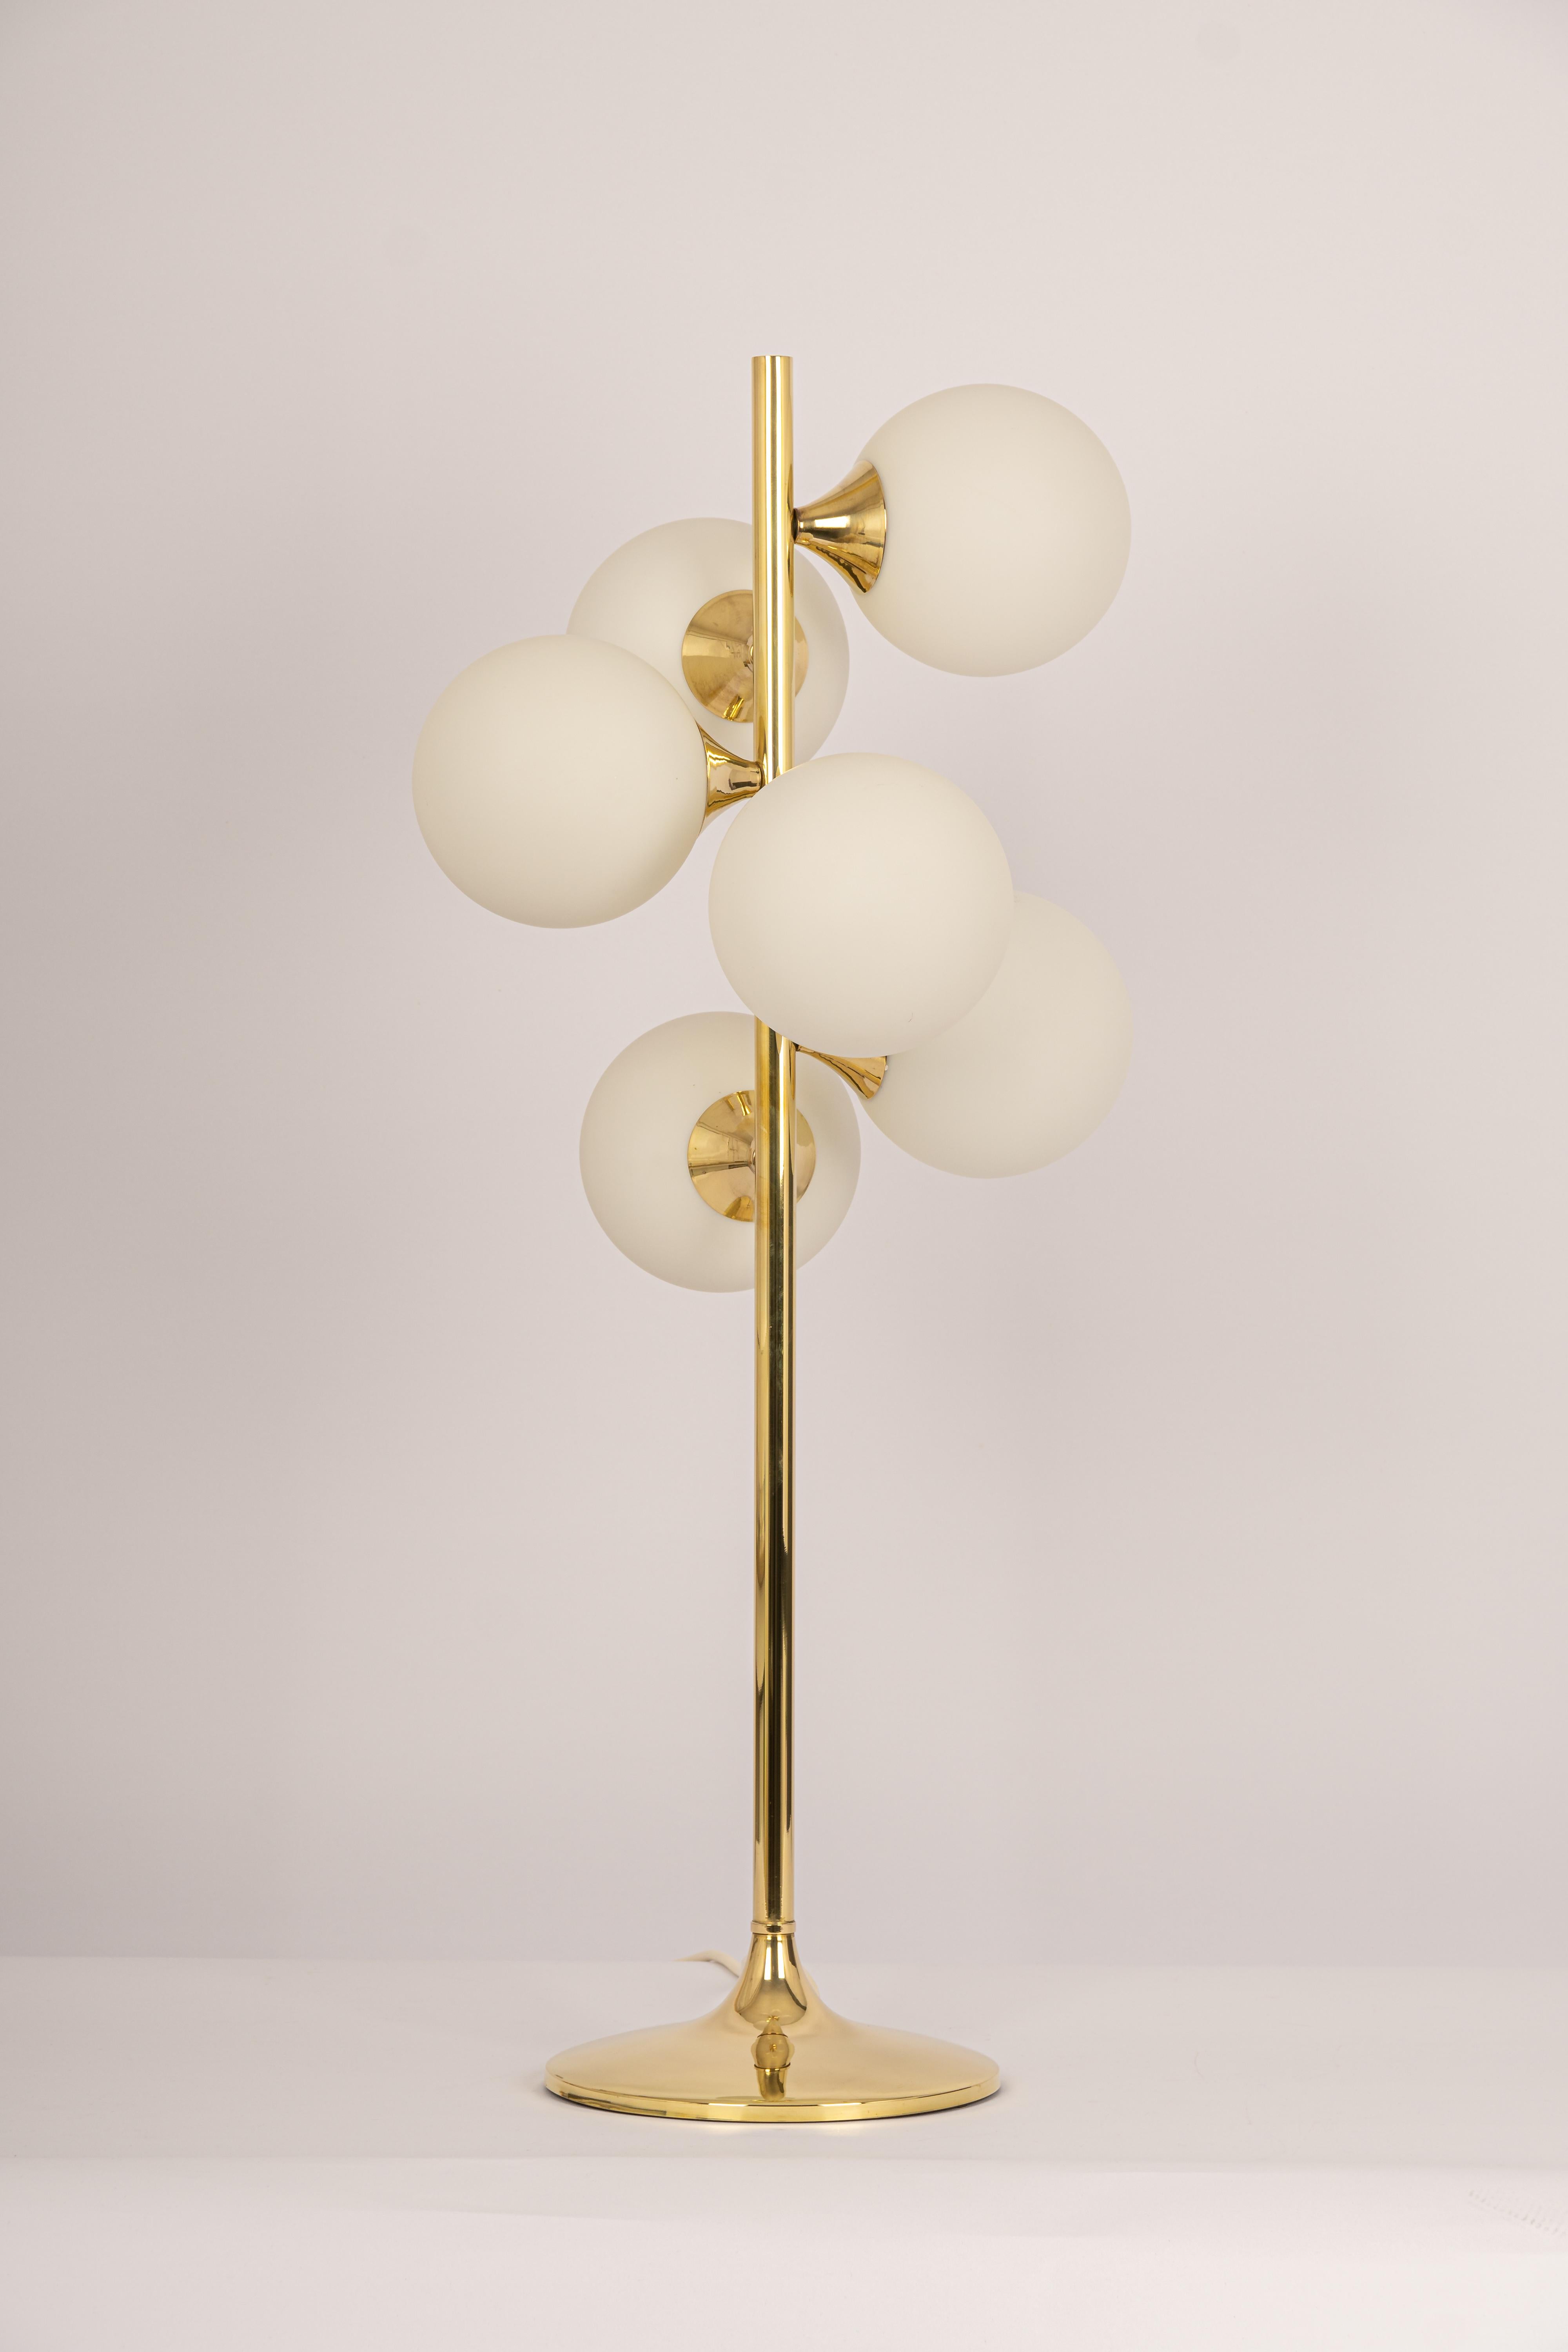 Stunning large brass table or floor lamp by Kaiser, Germany, 1970s
It’s composed of 6 Opal glass pieces on a brass frame.

High quality and in very good condition. Cleaned, well-wired and ready to use. 

Each table lamp requires 6 x E14 Small